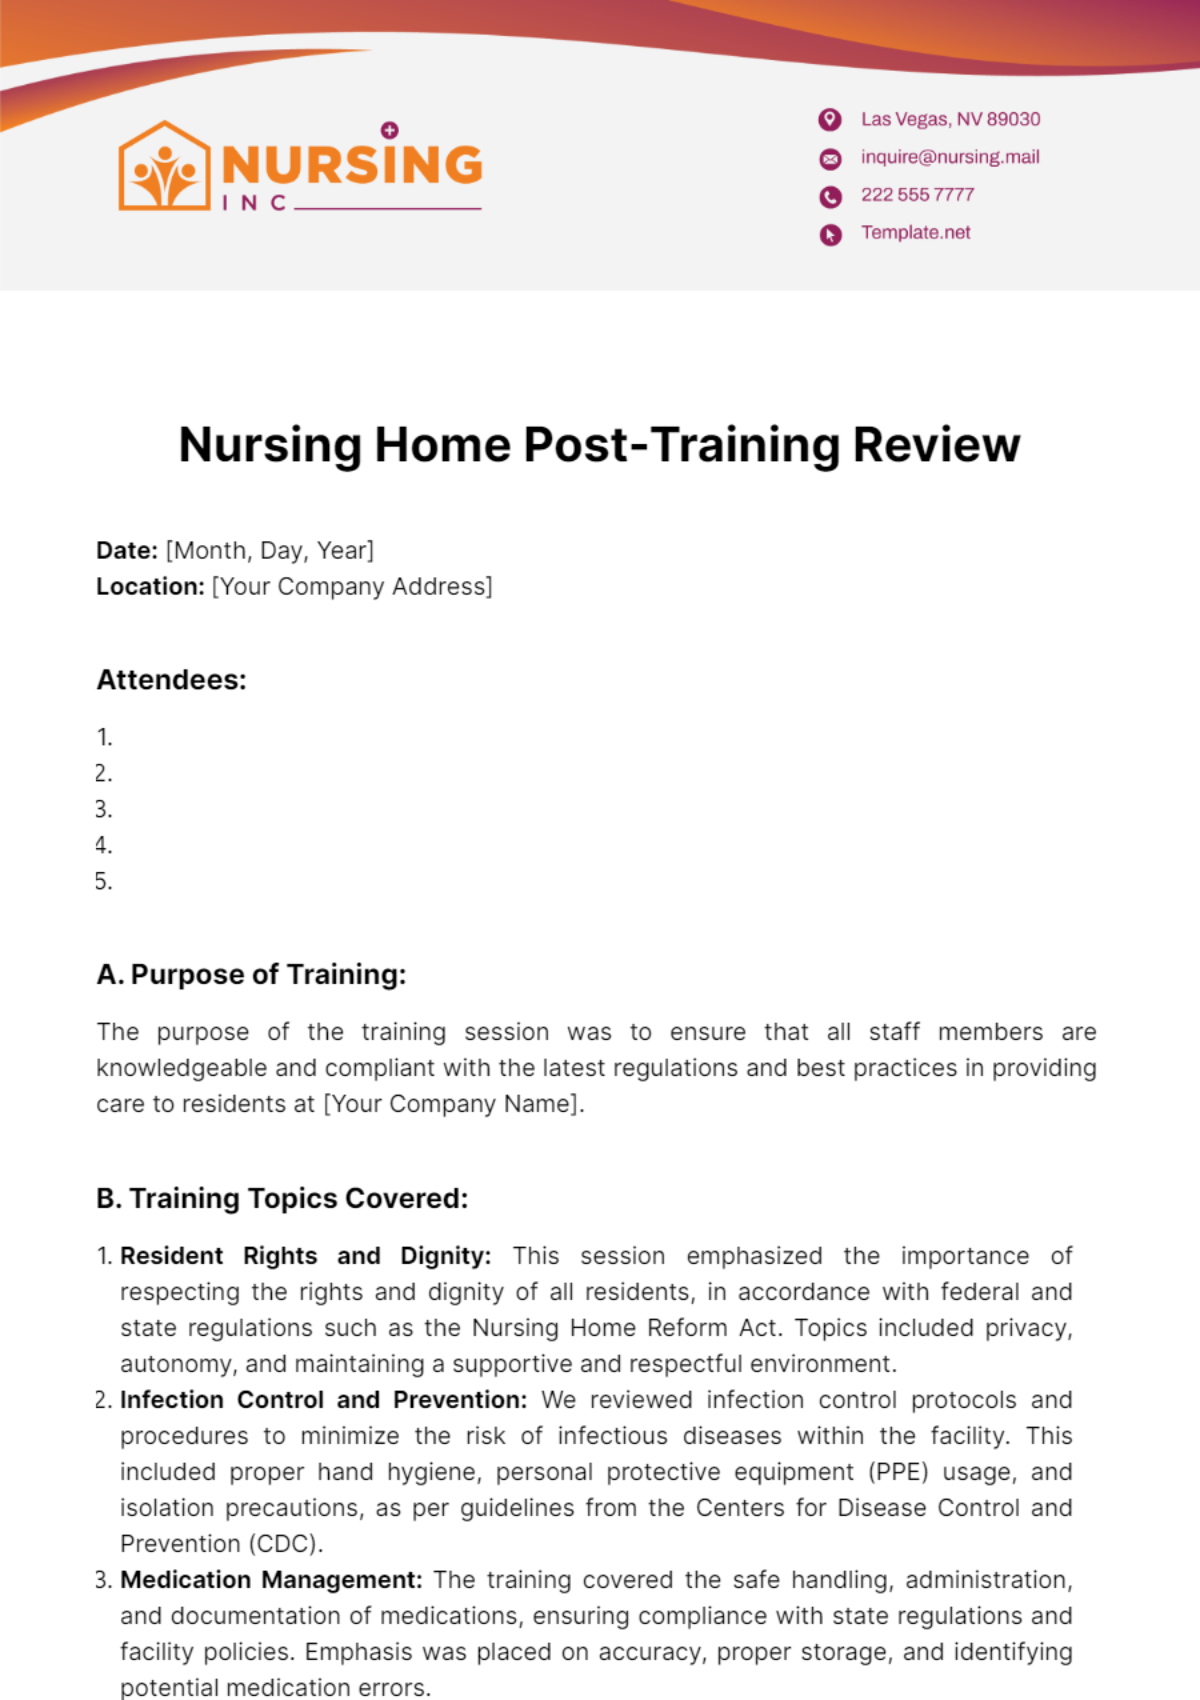 Nursing Home Post-Training Review Template